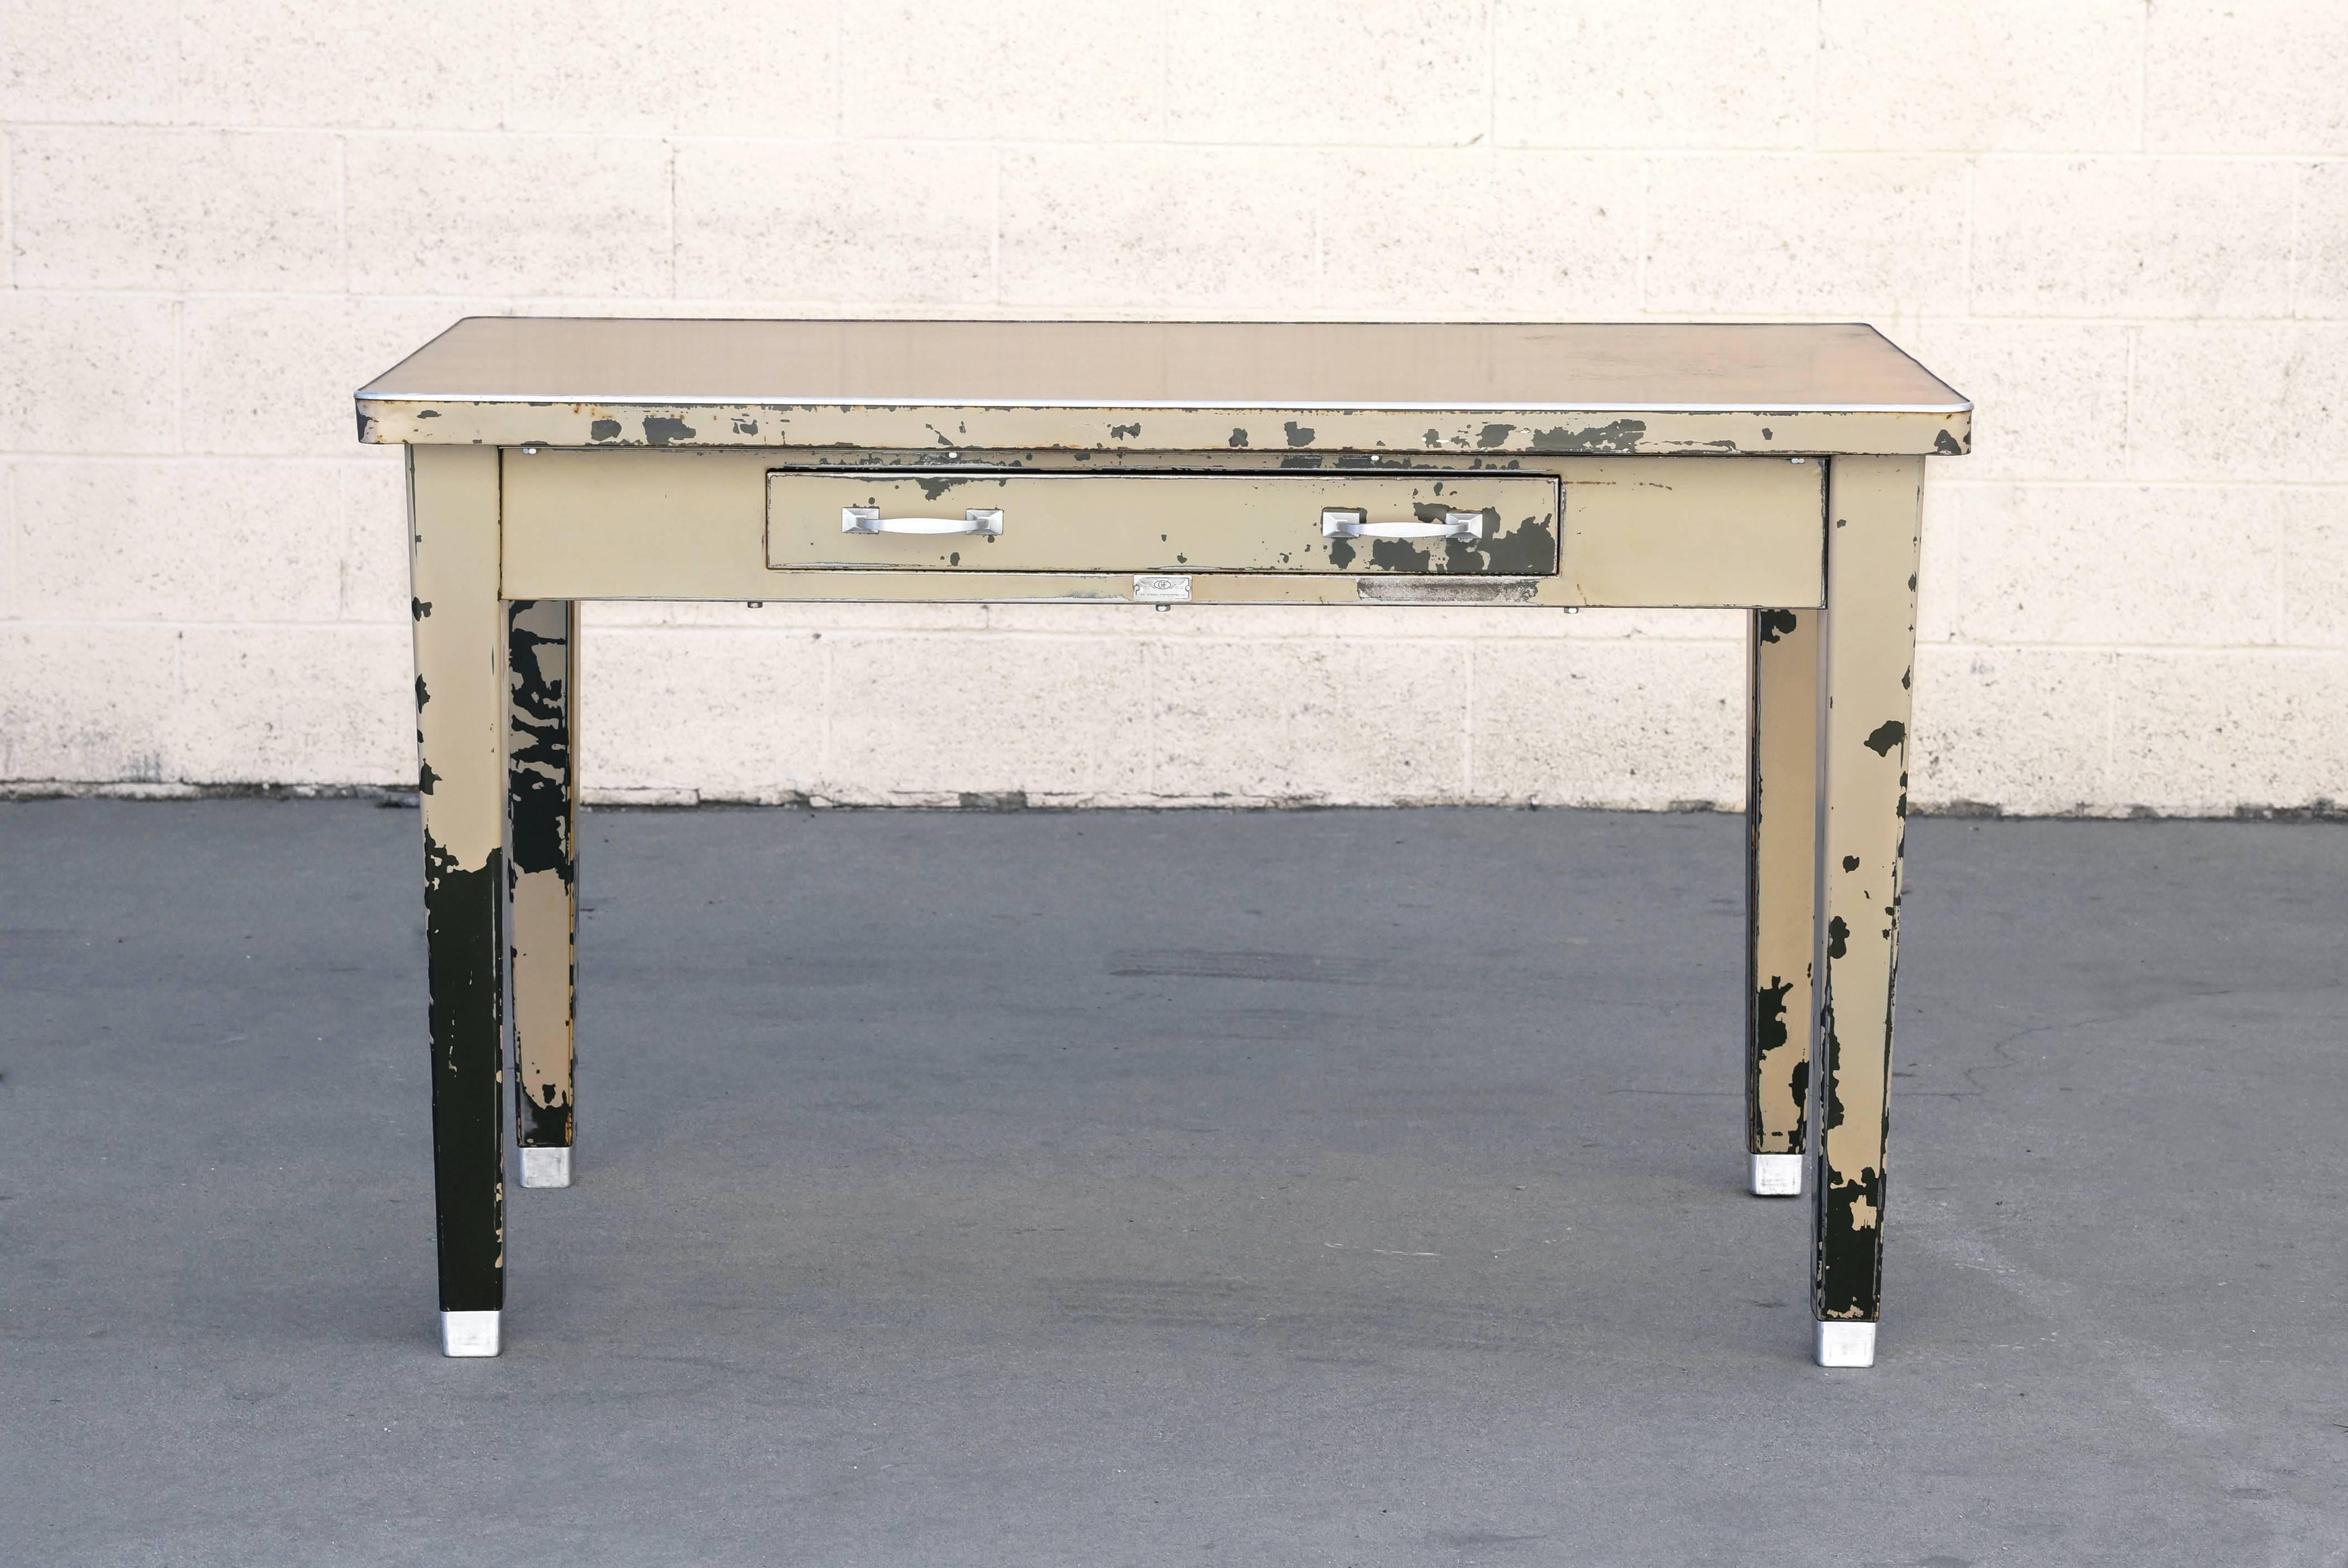 Industrial era four-legged tanker table by General Fireproofing Co., with a characteristic weathered patina. We accentuated the finish and added a light satin clear coat. All original aluminum hardware polished to a shine. Features single utility